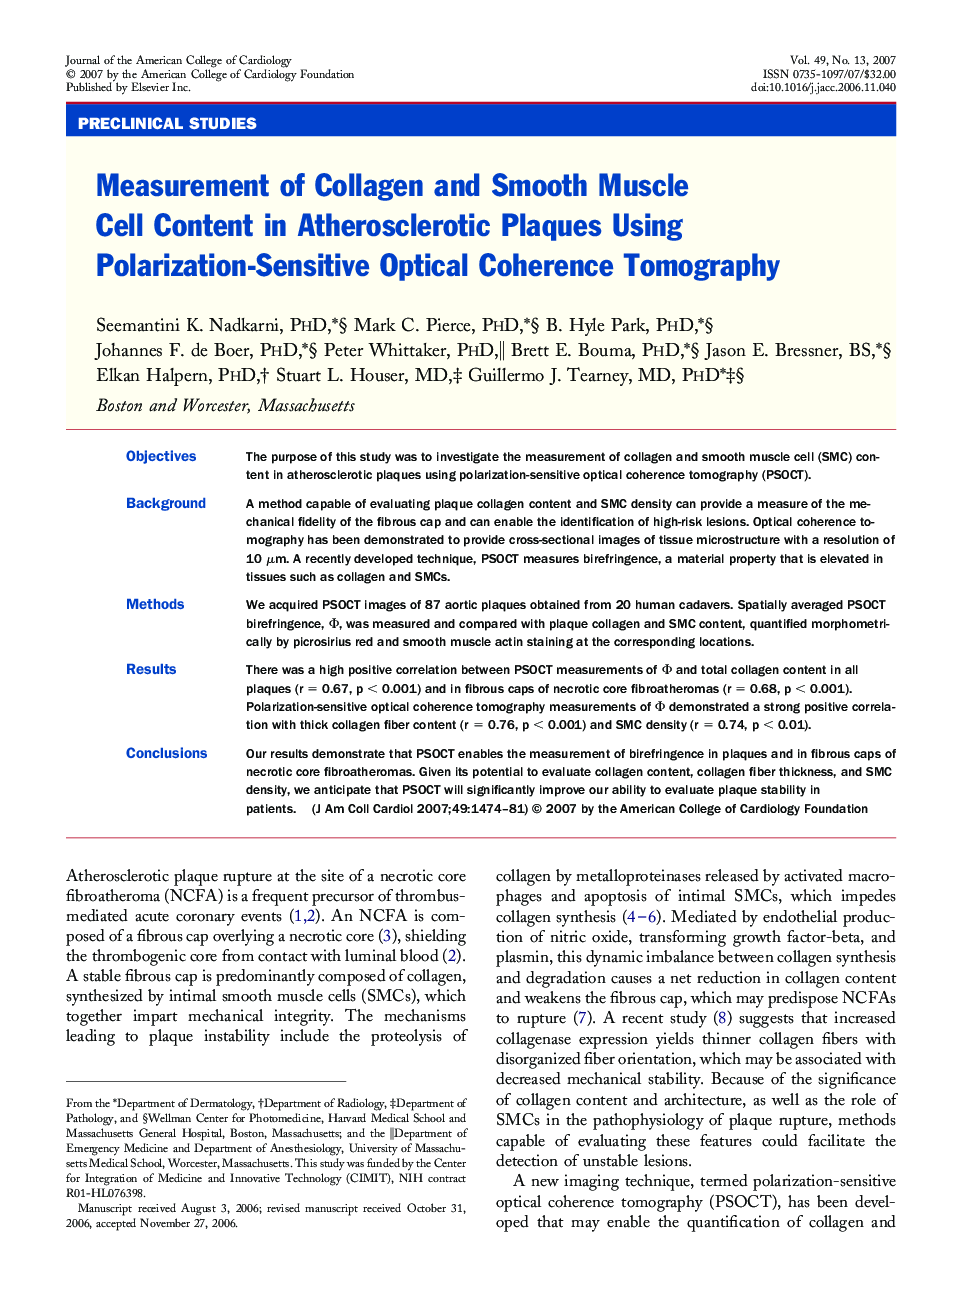 Measurement of Collagen and Smooth Muscle Cell Content in Atherosclerotic Plaques Using Polarization-Sensitive Optical Coherence Tomography 